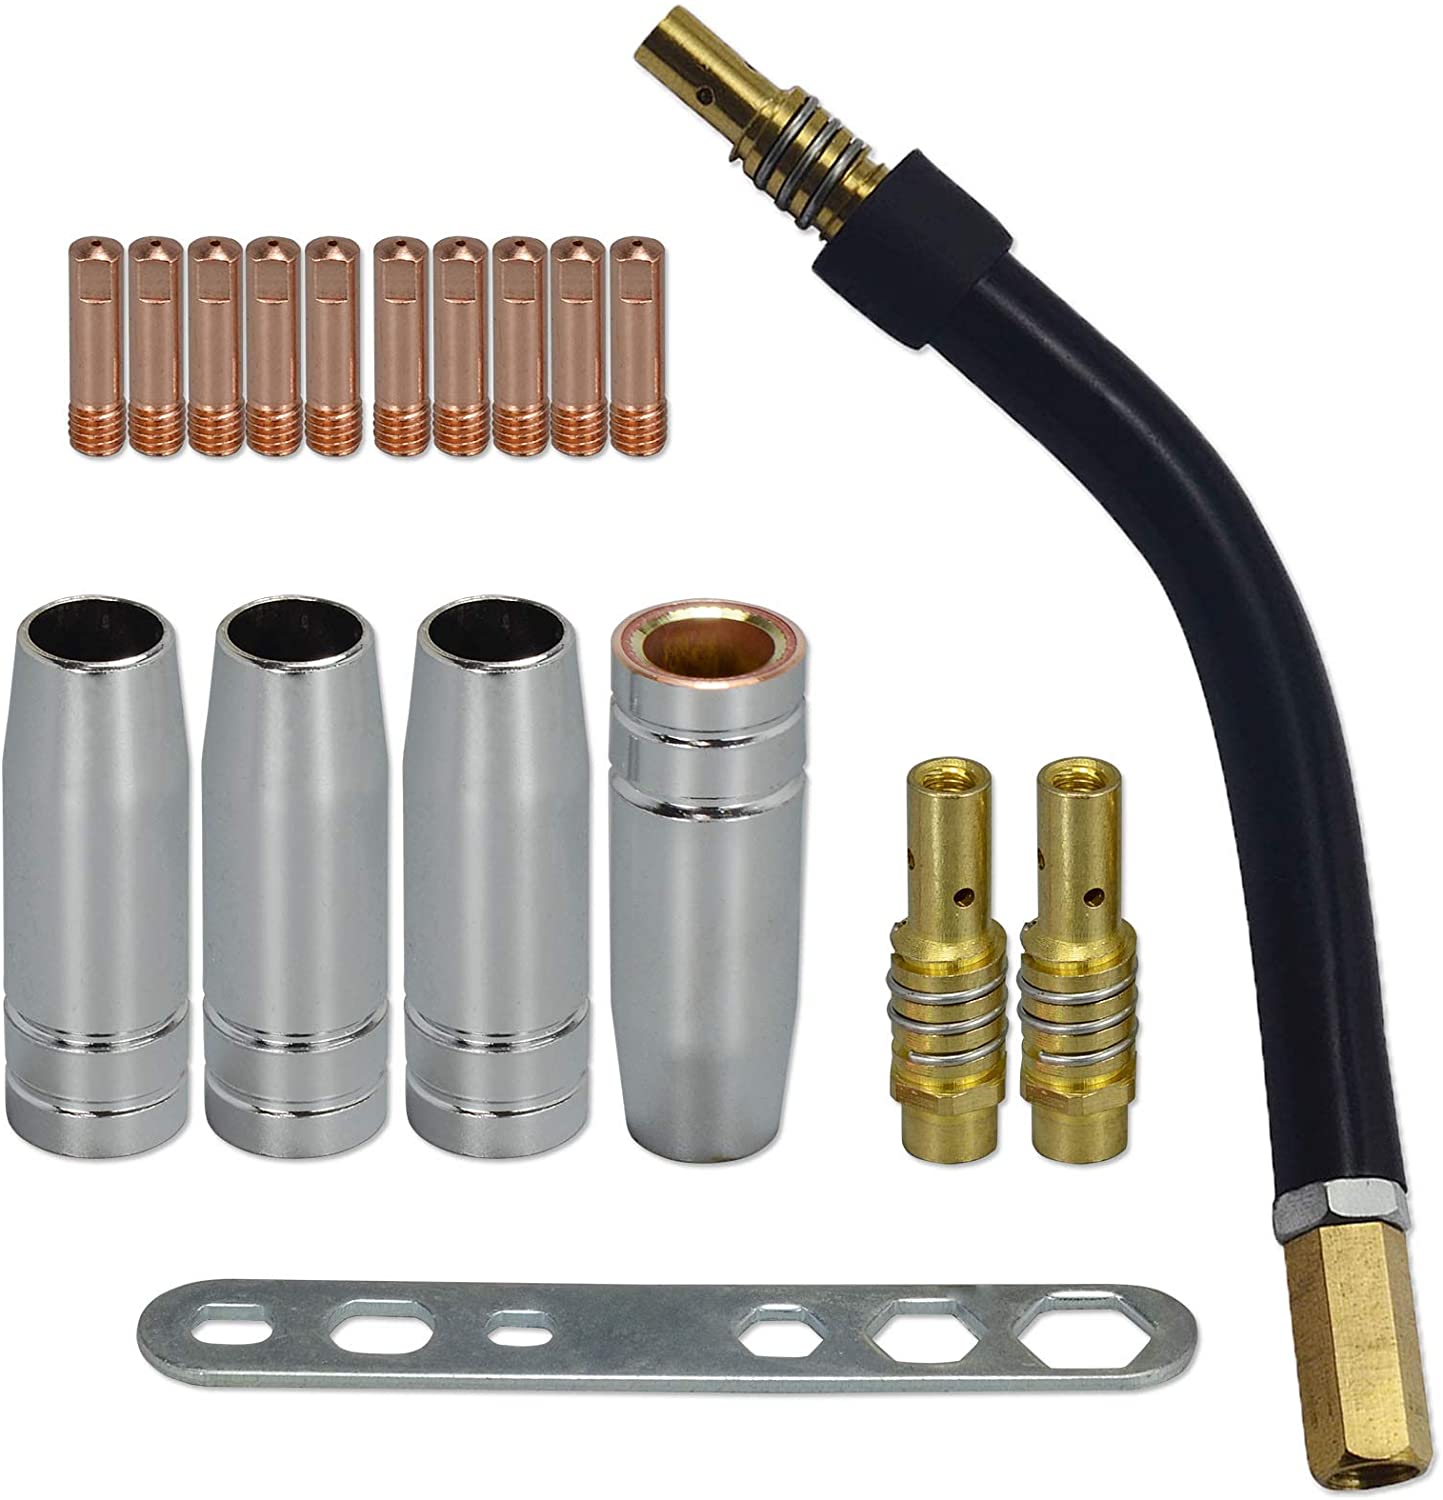   Roll over image to zoom in  MB15 15AK Contact Tip .045'' 1.2mm M6 & Tips Holder Difuser & Shield cup & Torch Neck For MB15 15AK MIG Welding Torch 18pk 